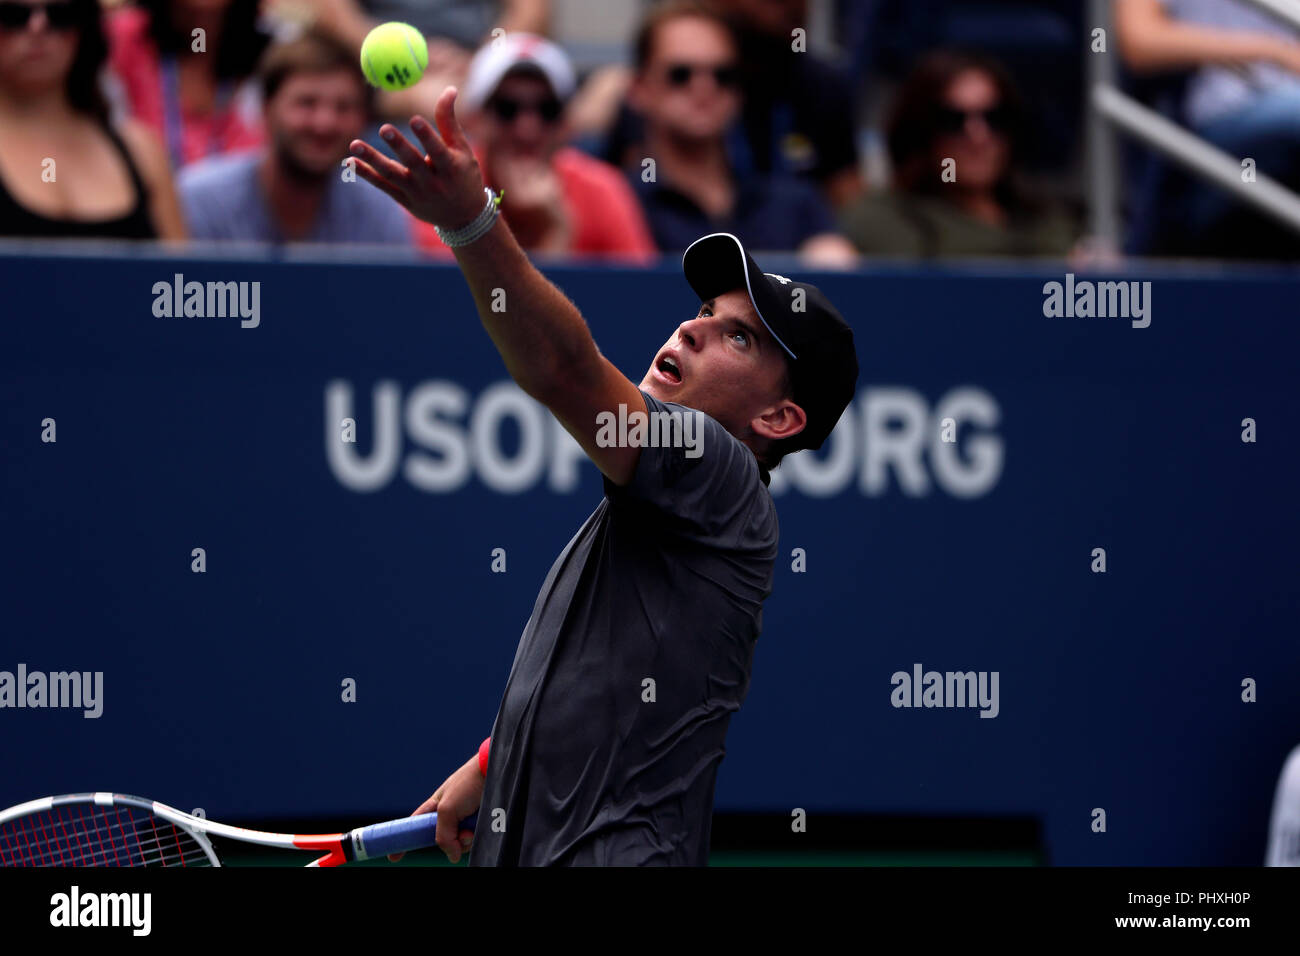 New York, United States. 02nd Sep, 2018. Flushing Meadows, New York - September 2, 2018: US Open Tennis: Number 9 seed, Dominic Thiem of Austria in action against Kevin Anderson of South Africa during their fourth round match at the US Open in Flushing Meadows, New York. Thiem won in straight sets. Credit: Adam Stoltman/Alamy Live News Stock Photo